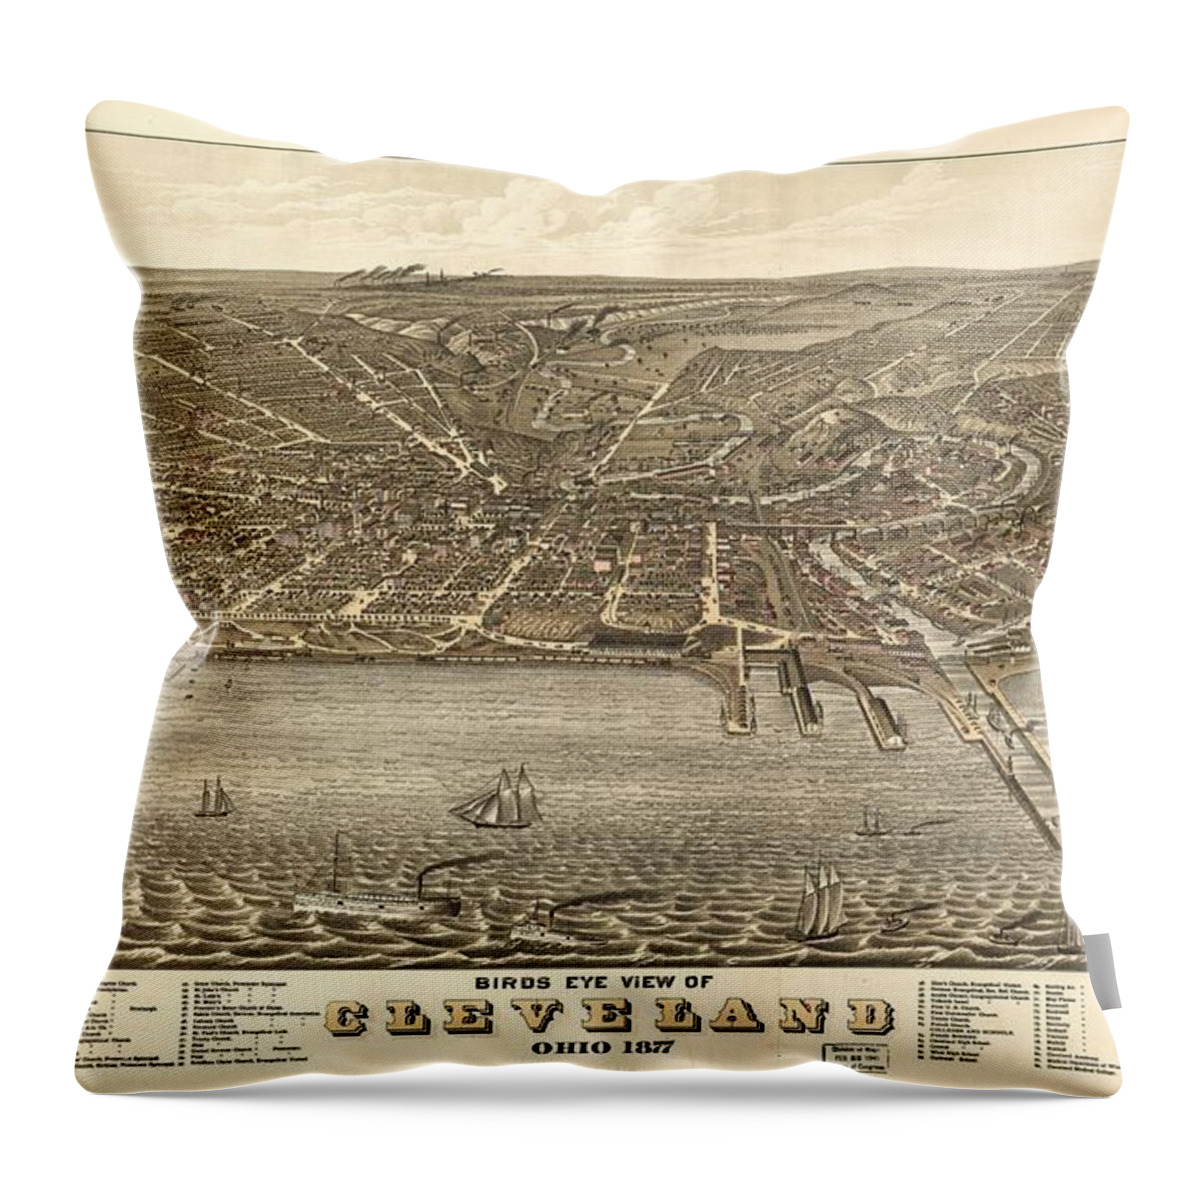 Antique Birds Eye View Map Of Cleveland Throw Pillow featuring the drawing Antique Maps - Old Cartographic maps - Antique Birds Eye View Map of Cleveland, Ohio, 1877 by Studio Grafiikka